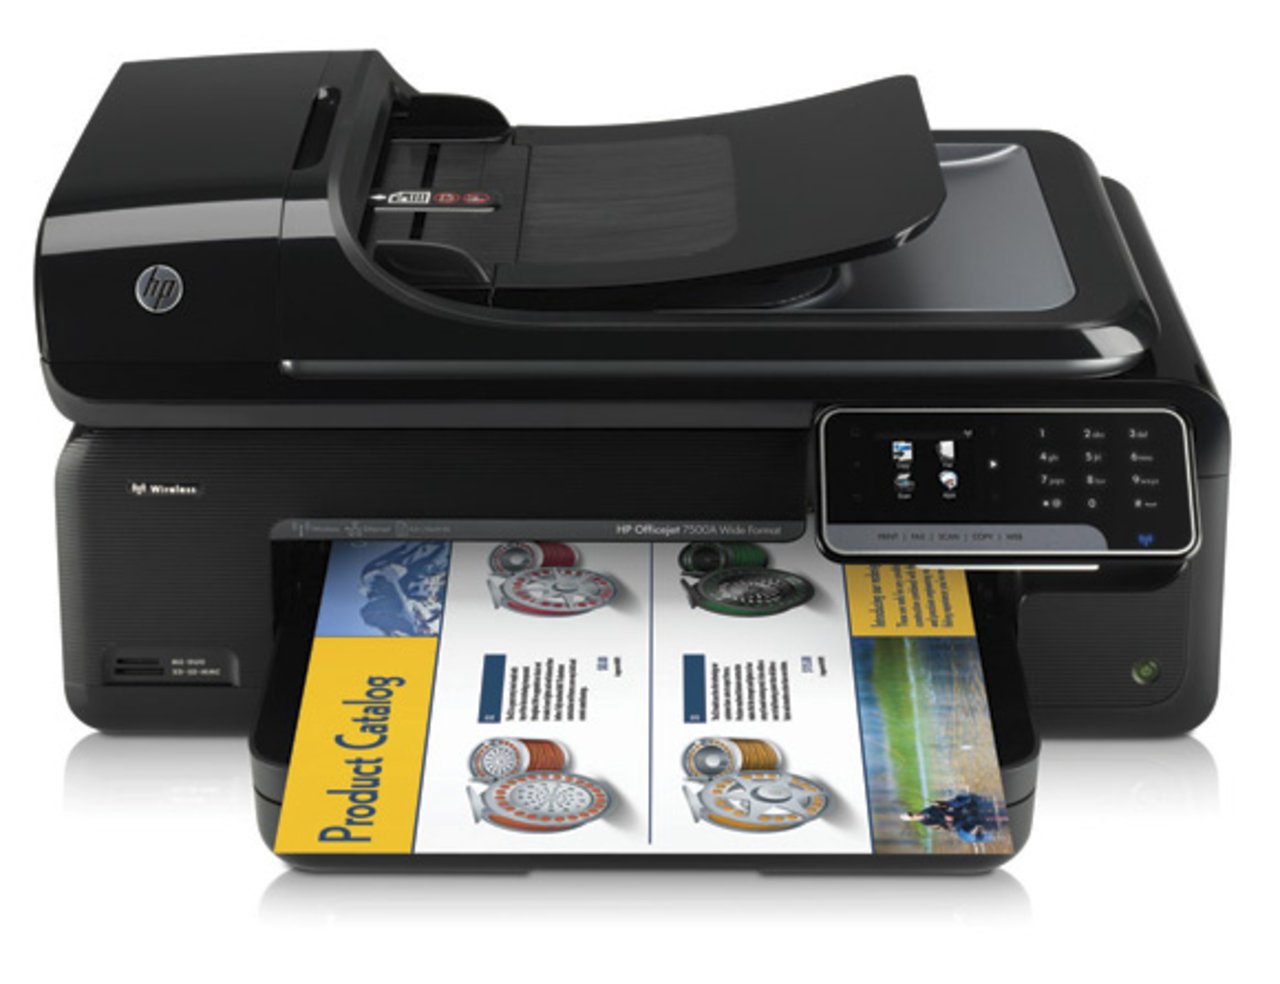 HP Officejet 7500A e-All-in-One Tintenstrahl